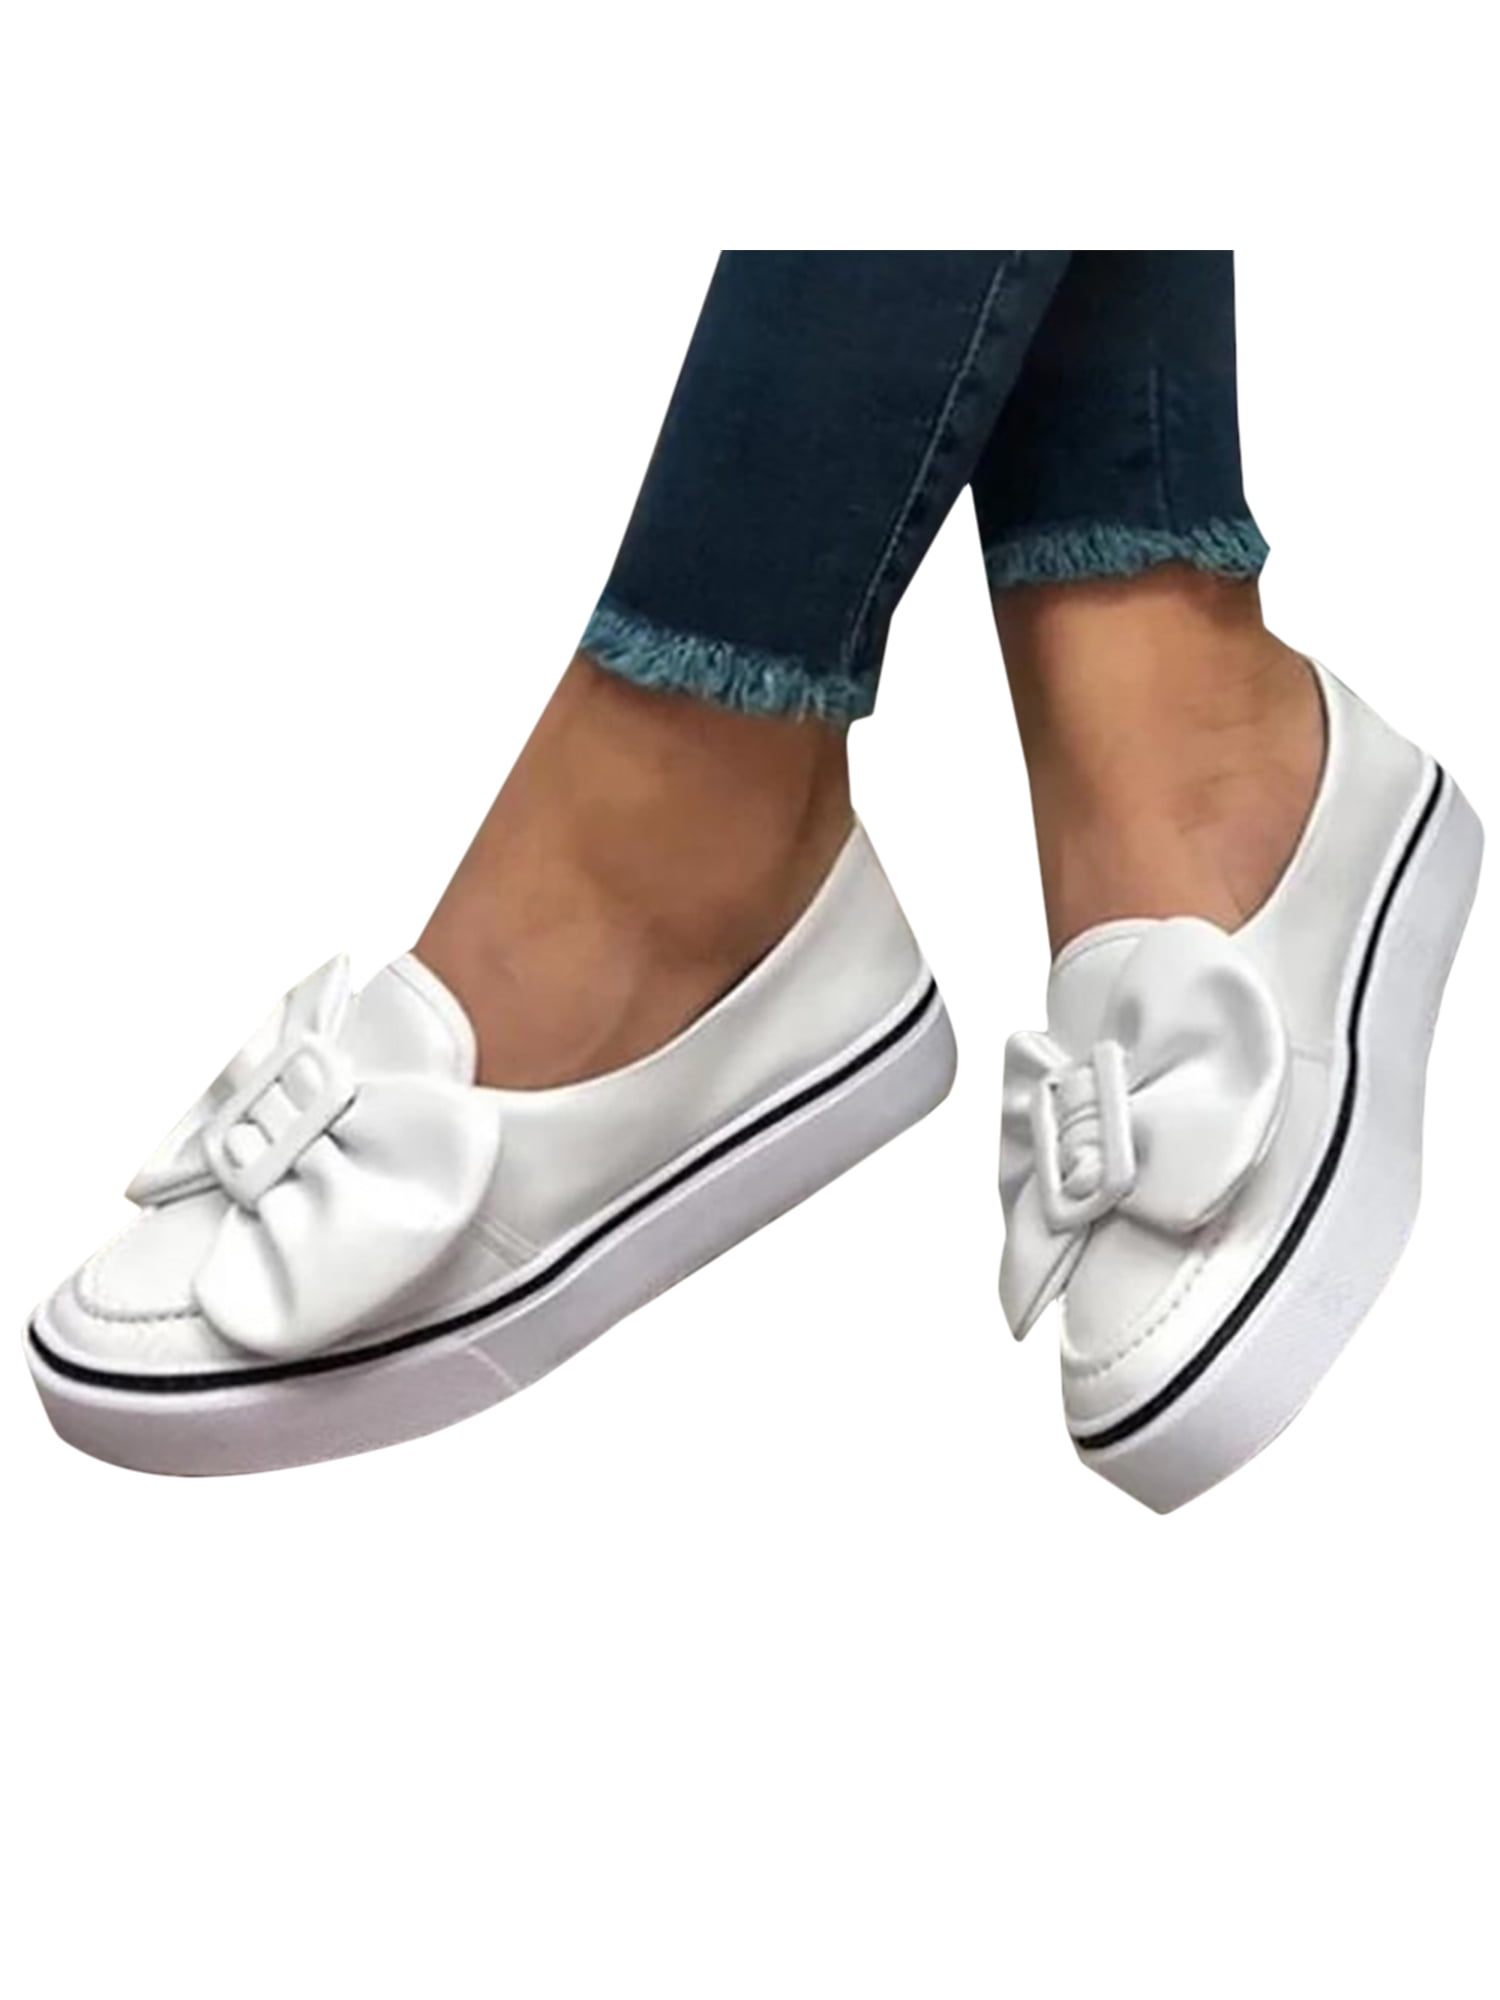 Womens Summer Bow Slip On Loafers Flats 